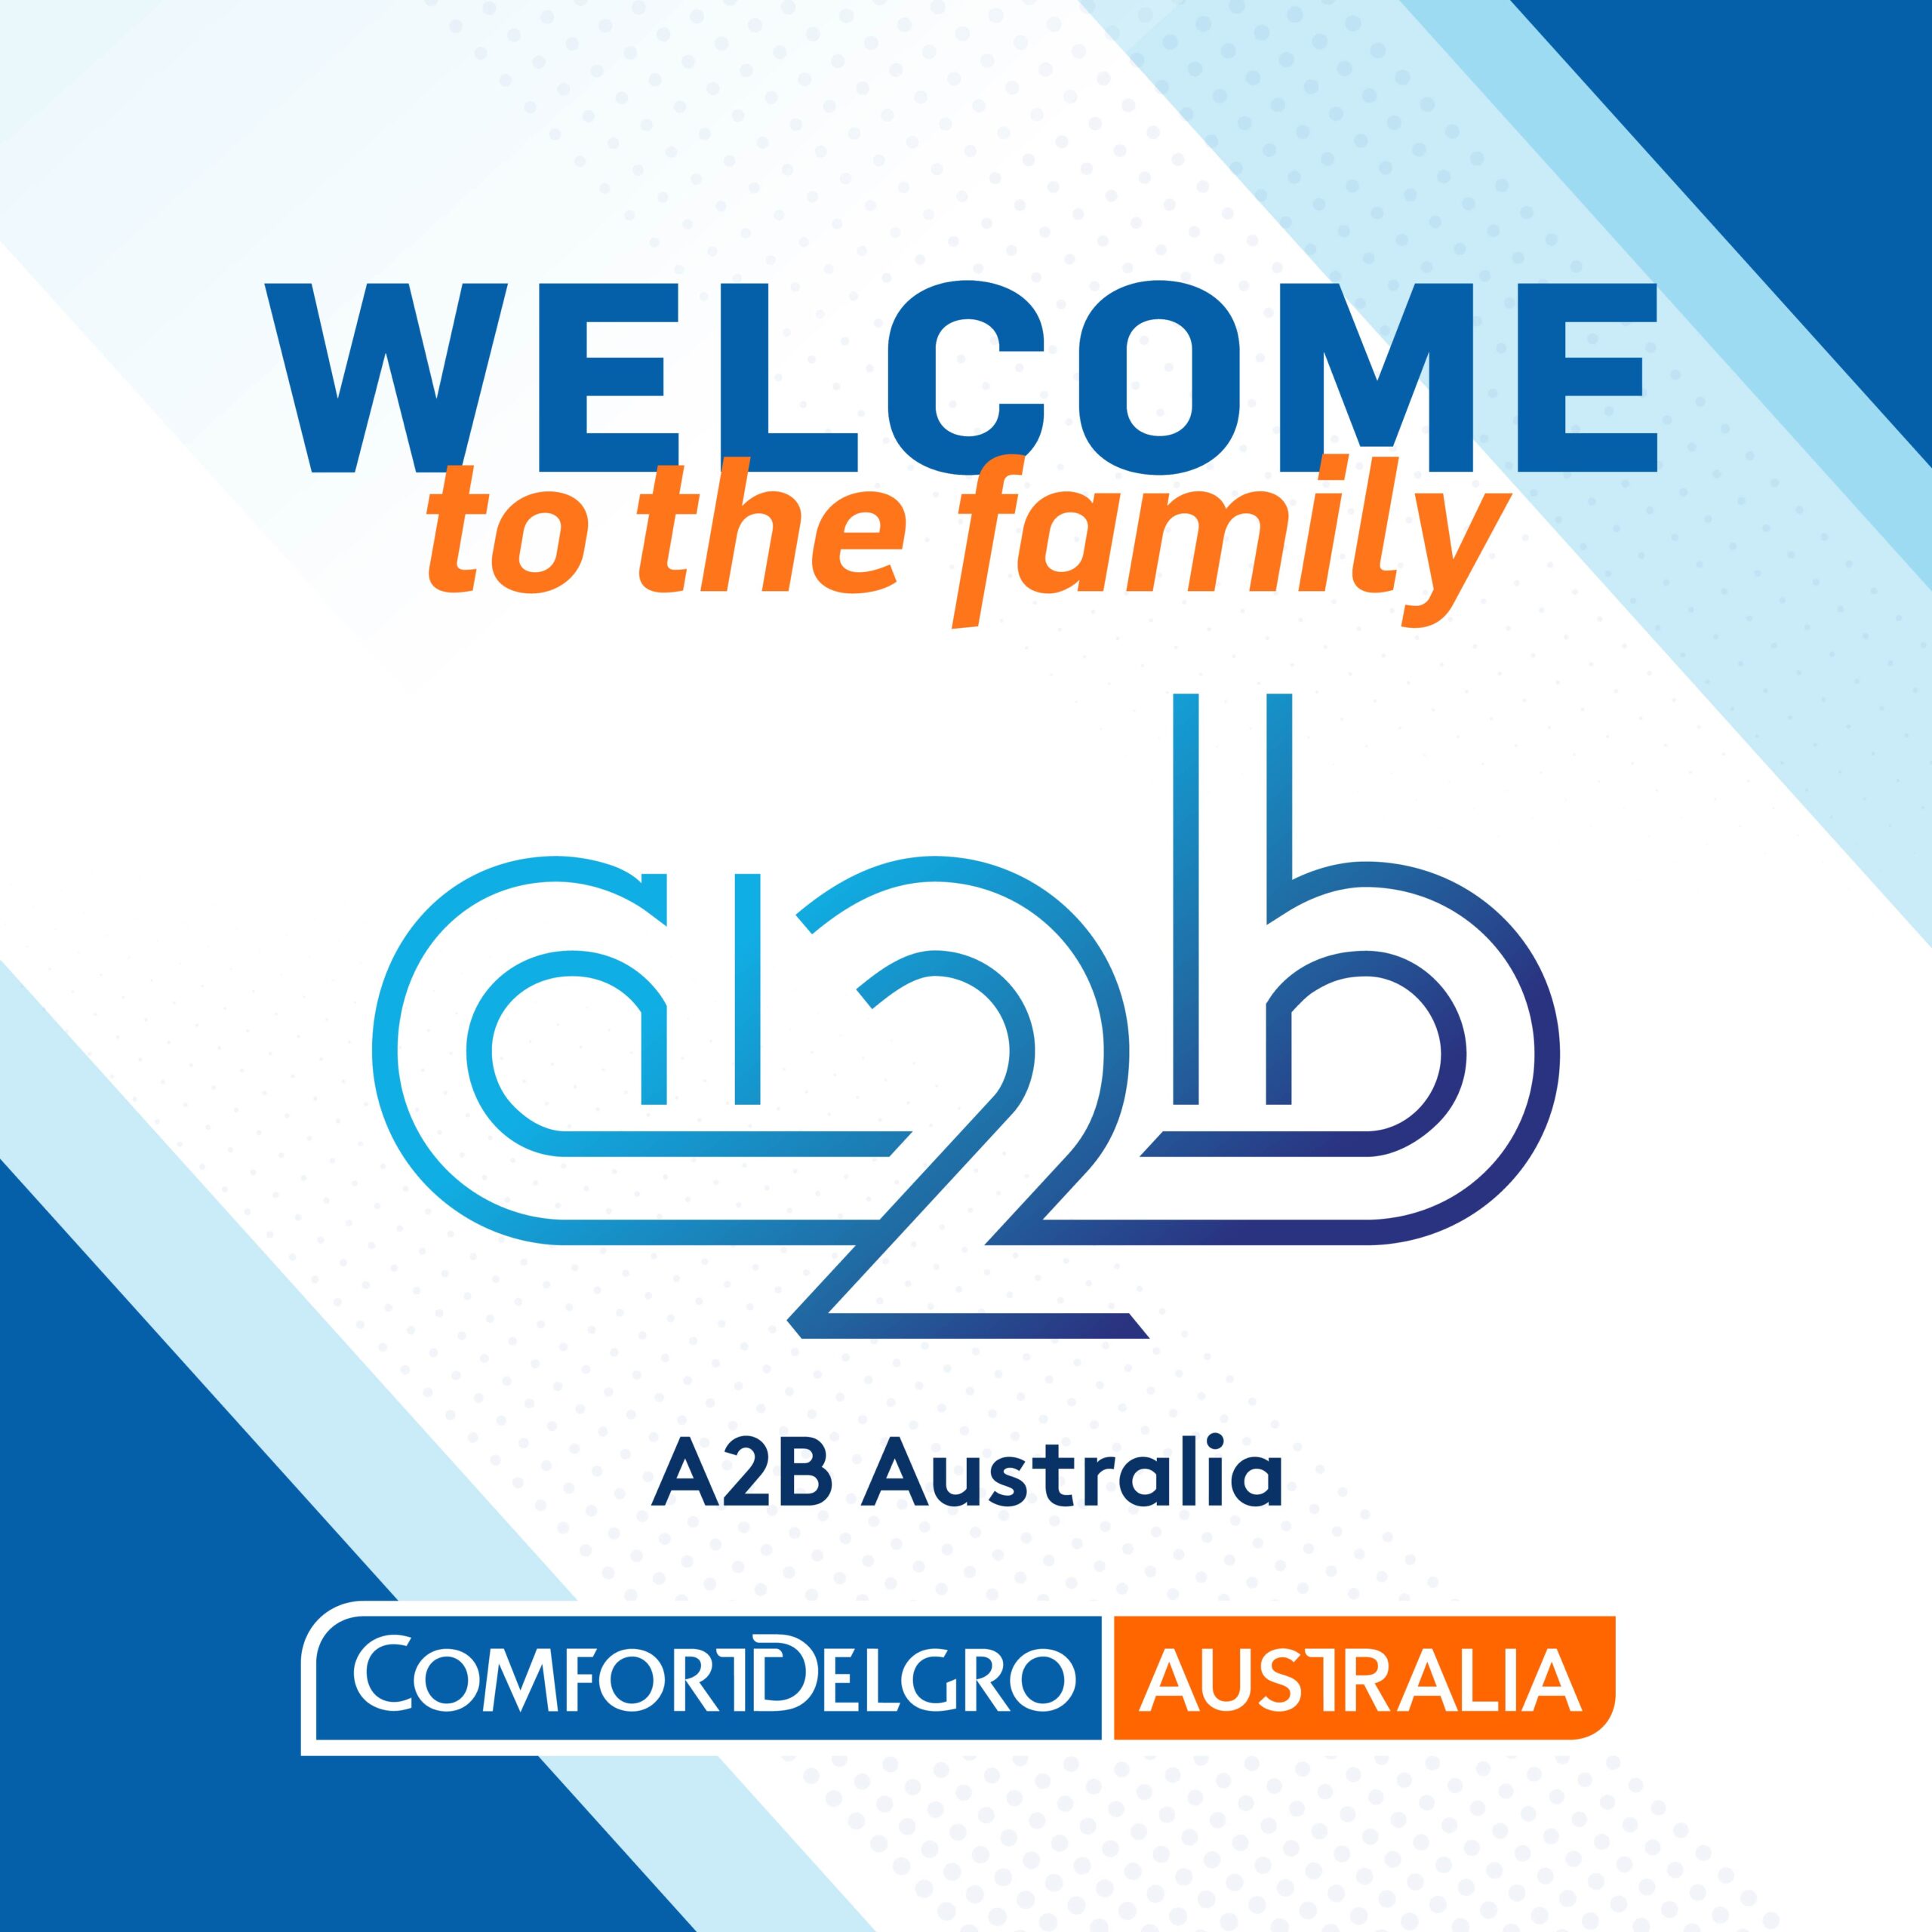 Welcome to the family - A2B Australia